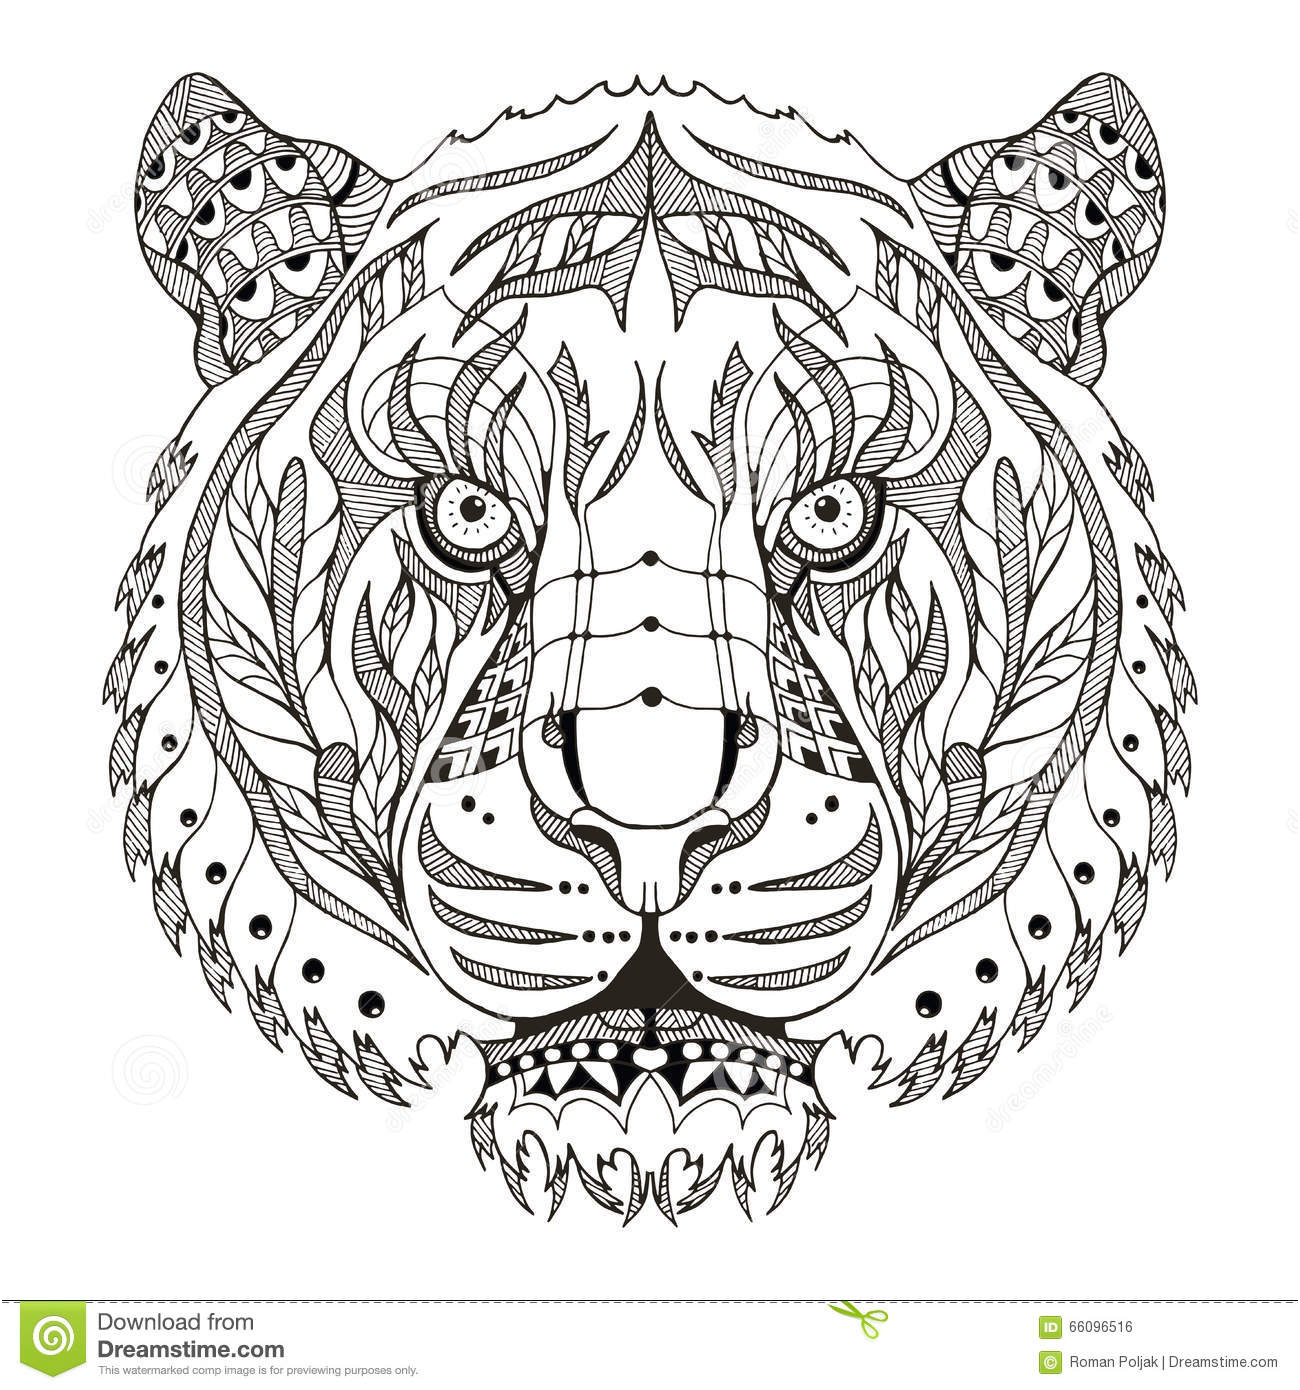 stock illustration tiger head zentangle stylized vector illustration pattern fr freehand pencil hand drawn zen art lace print t shirts covers image